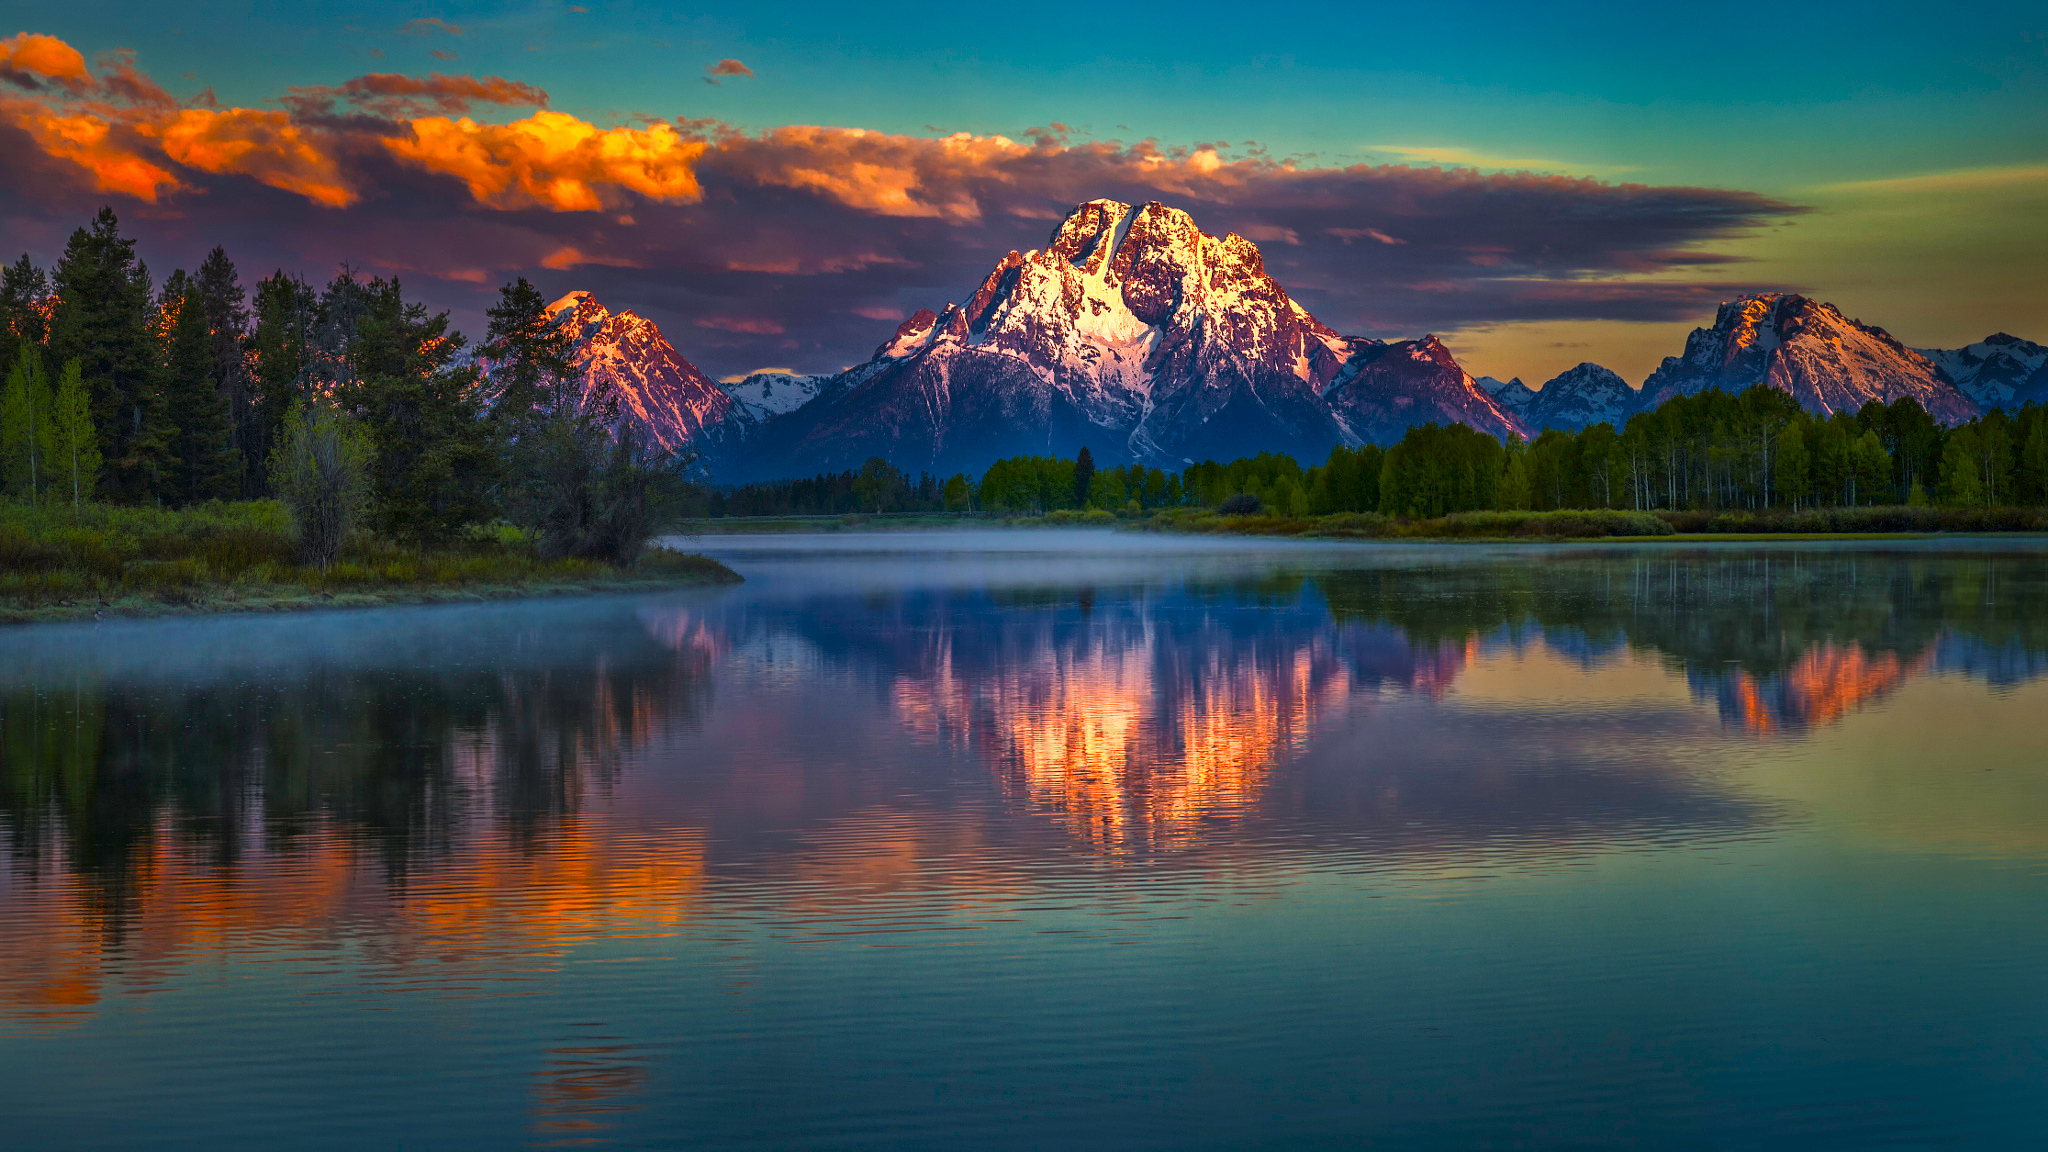 Free photo A mountain with a snowy peak is reflected in the lake at sunset